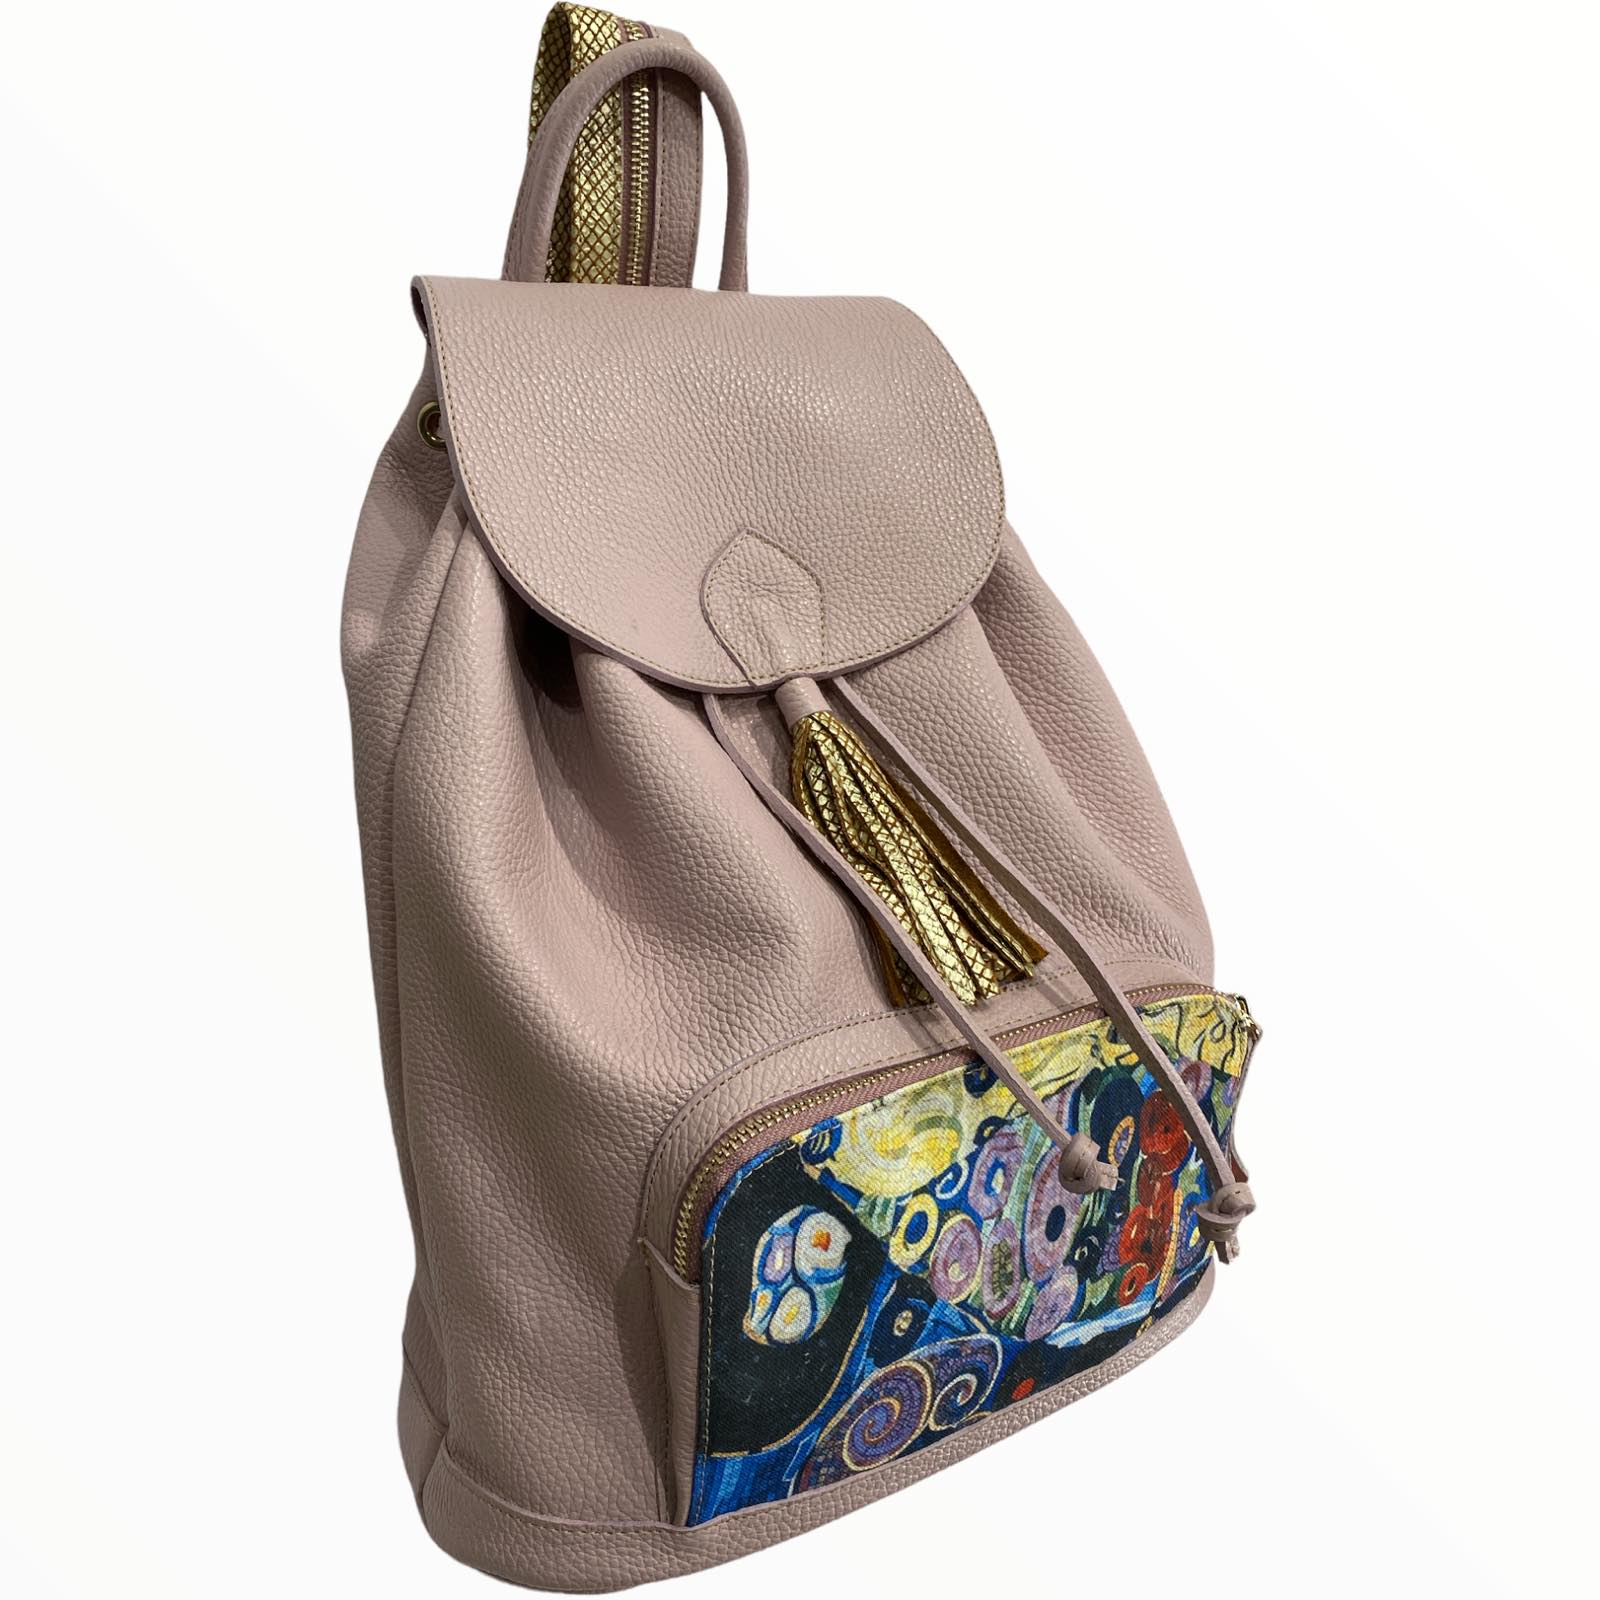 Travelling. Lavender leather backpack with art details